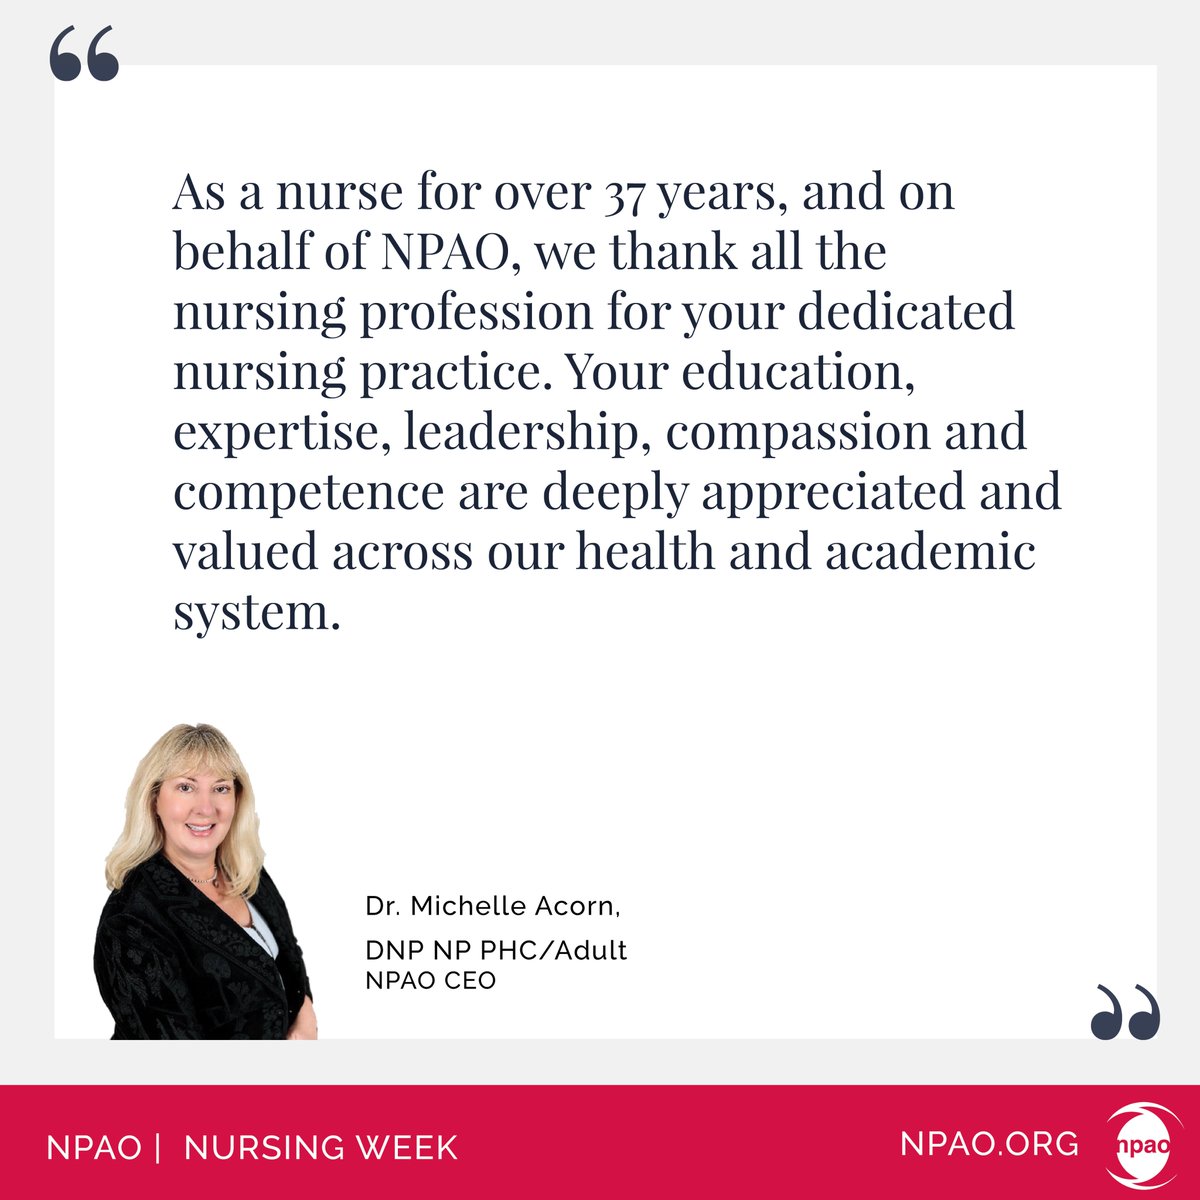 Happy Nursing Week! 'As a nurse for over 37 years, and on behalf of NPAO, we thank all the nursing profession for your dedicated nursing practice. Your education, expertise, leadership, compassion & competence are deeply appreciated & valued across our health & academic system.'